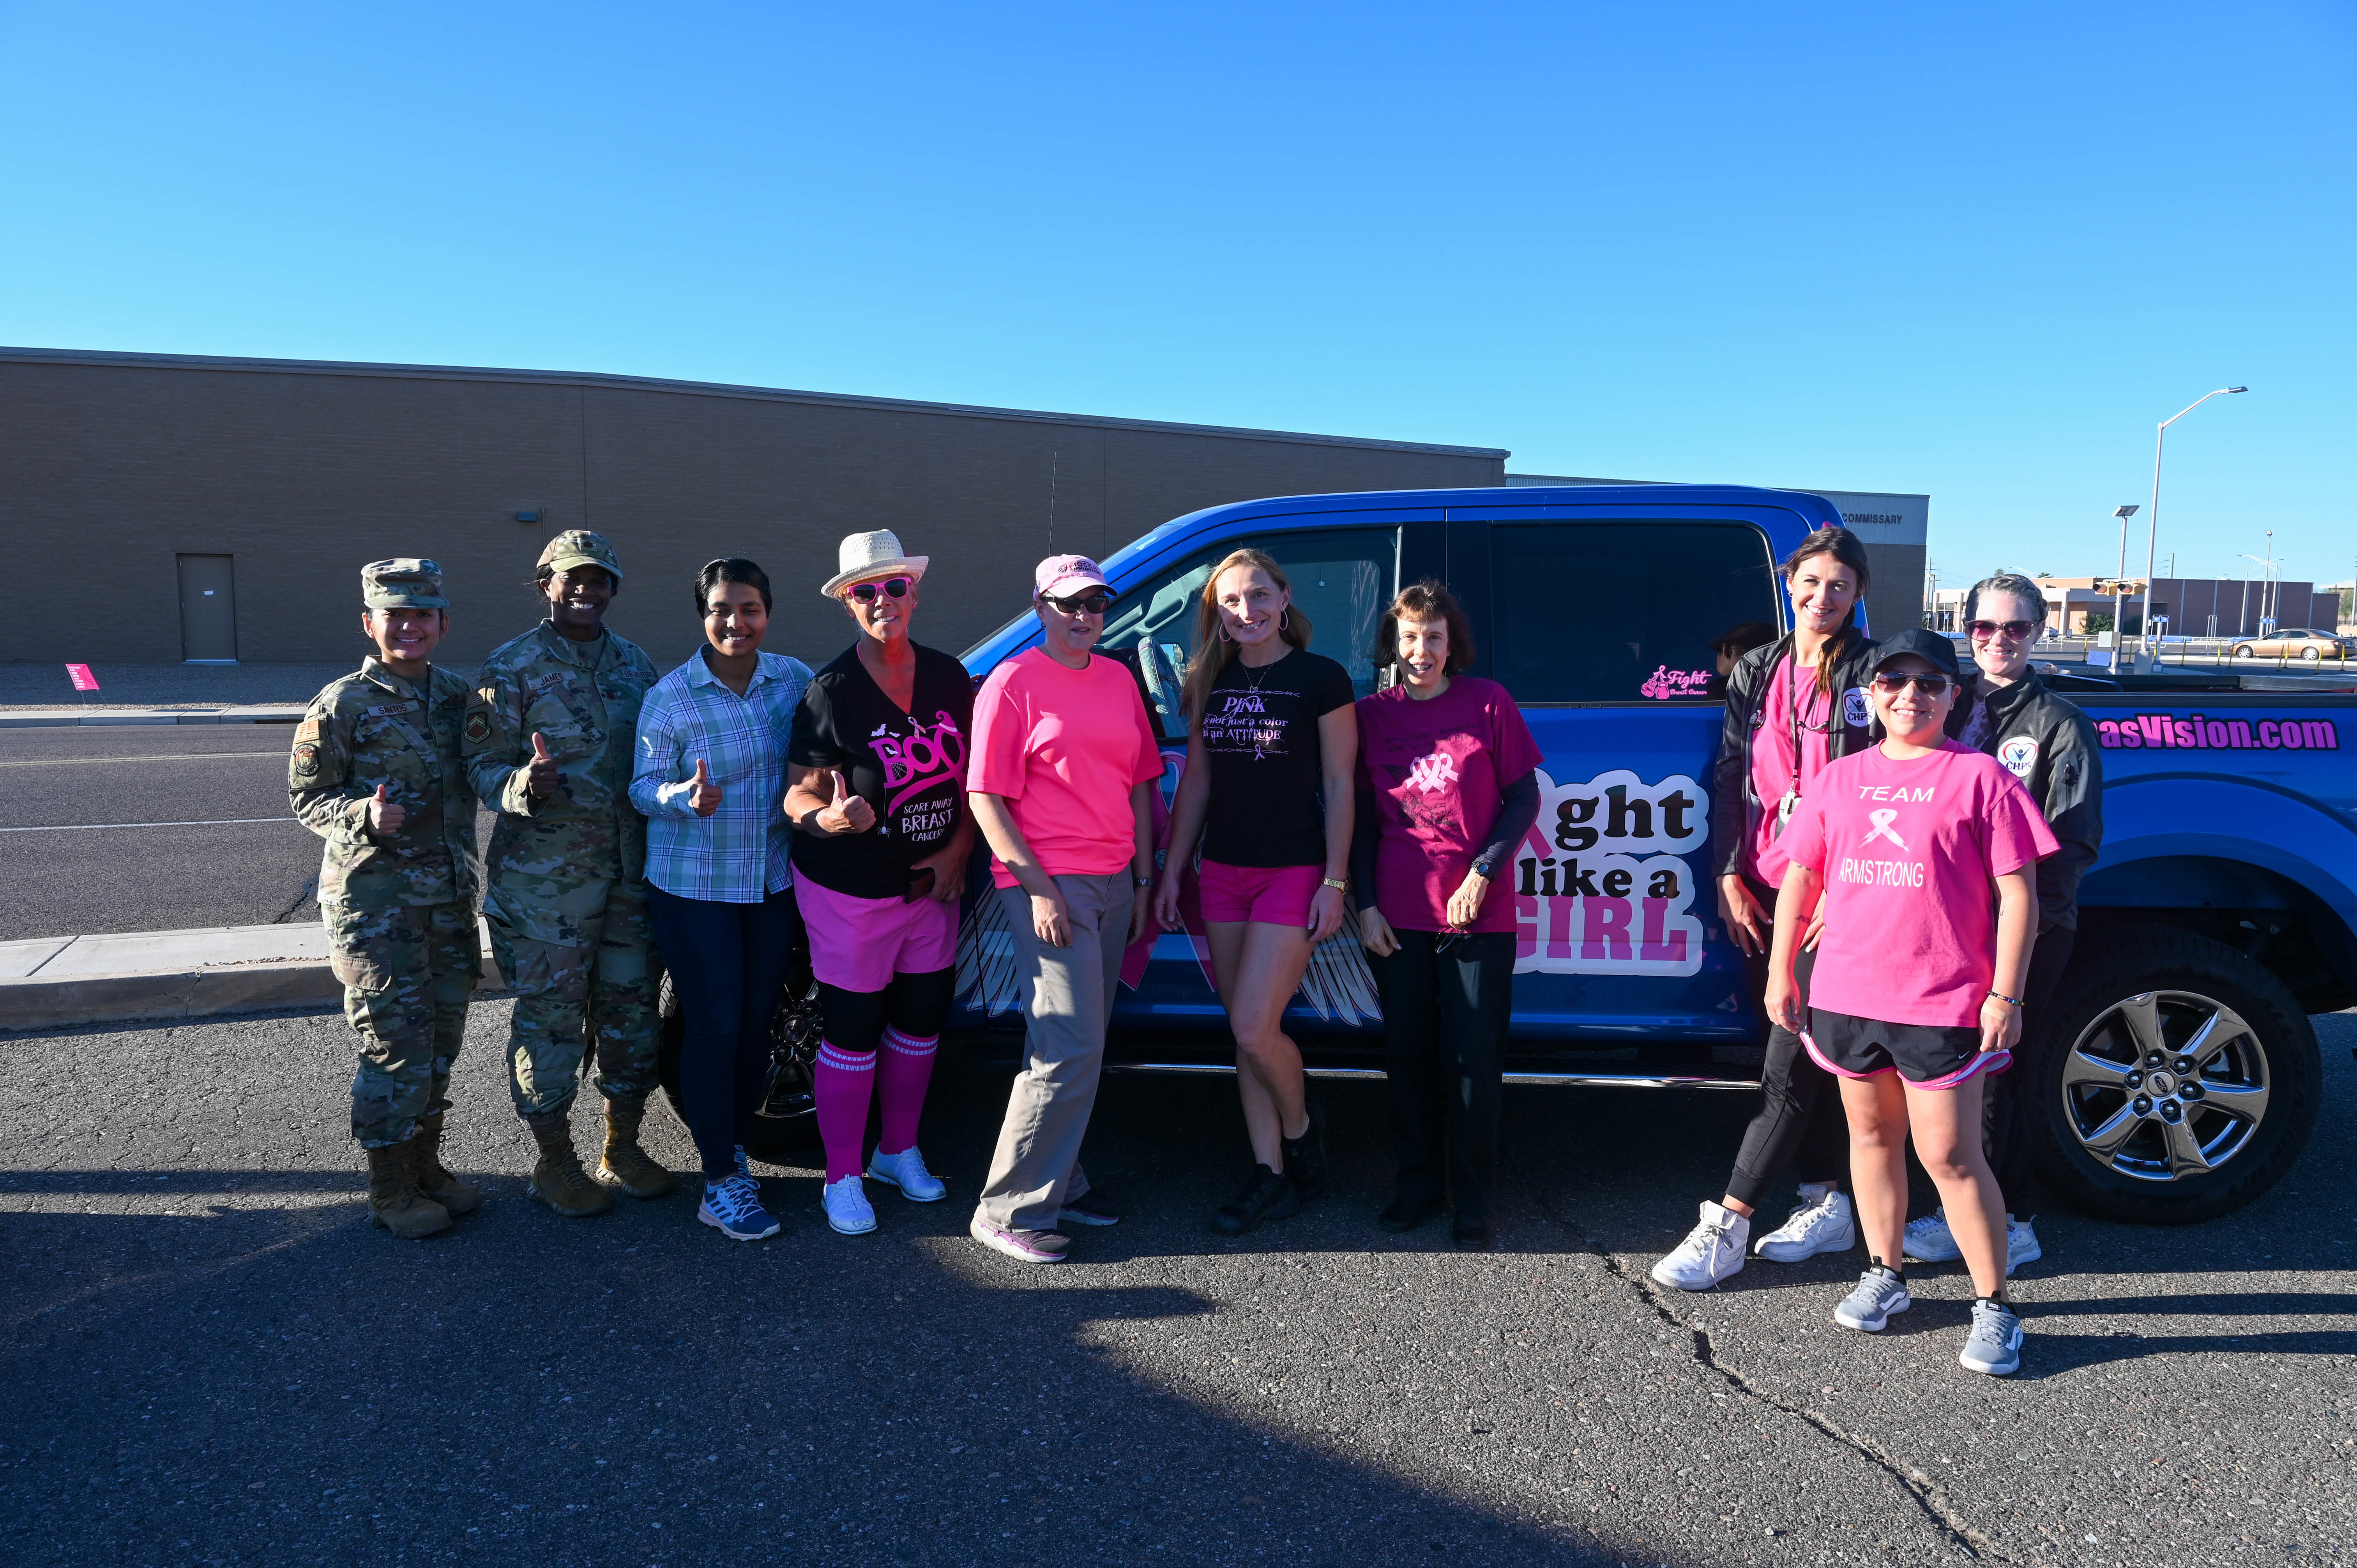 Uplifting event provides breast cancer awareness > Joint Base